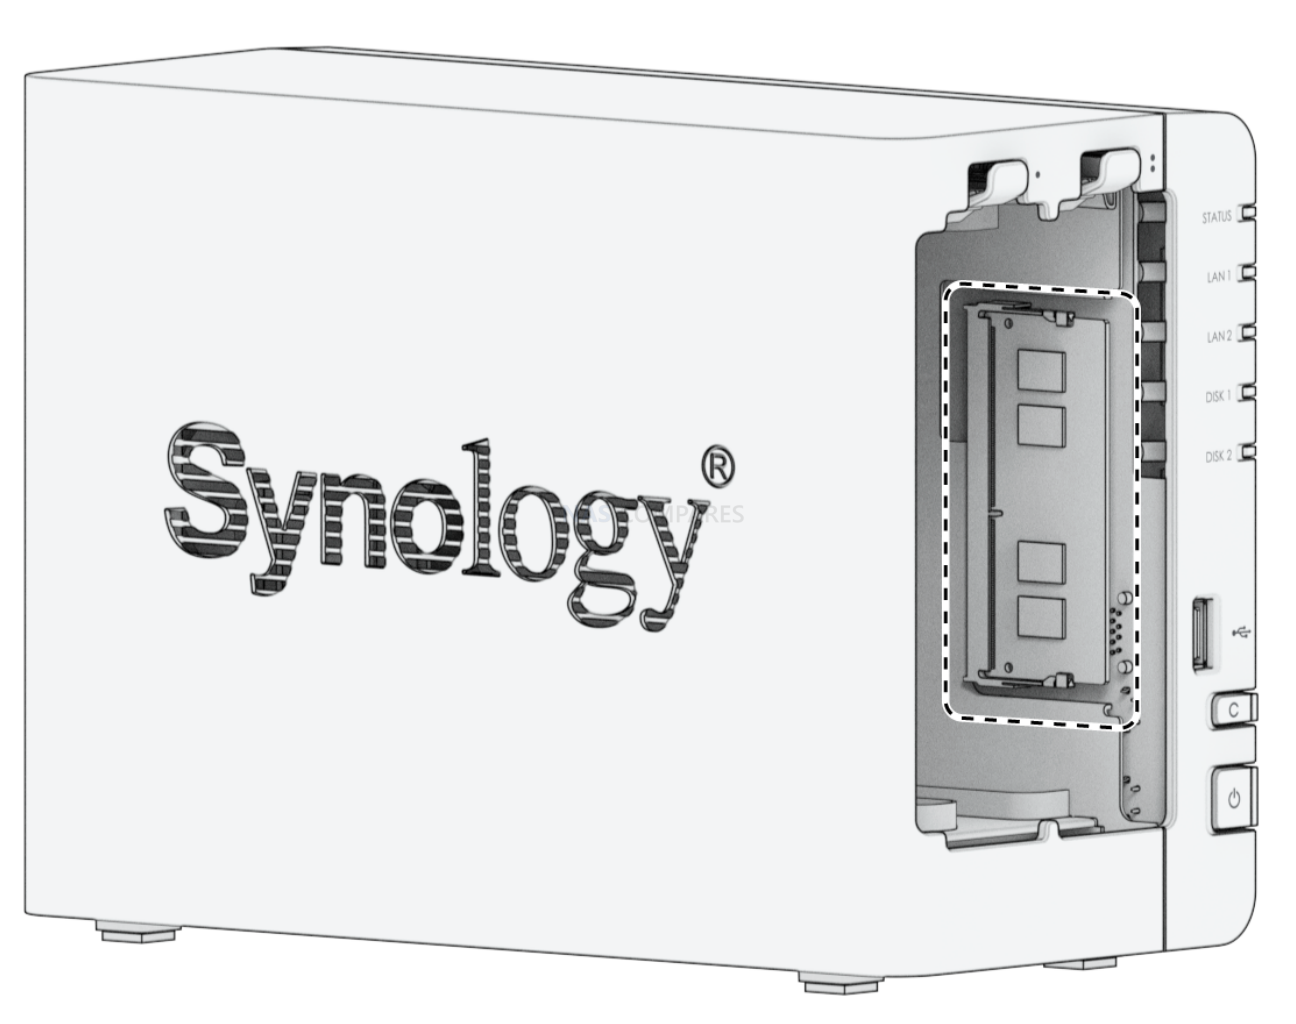 NAS SYNOLOGY DS224+ avec 2 HDD en RAID (1, 2, 4, 8 To)